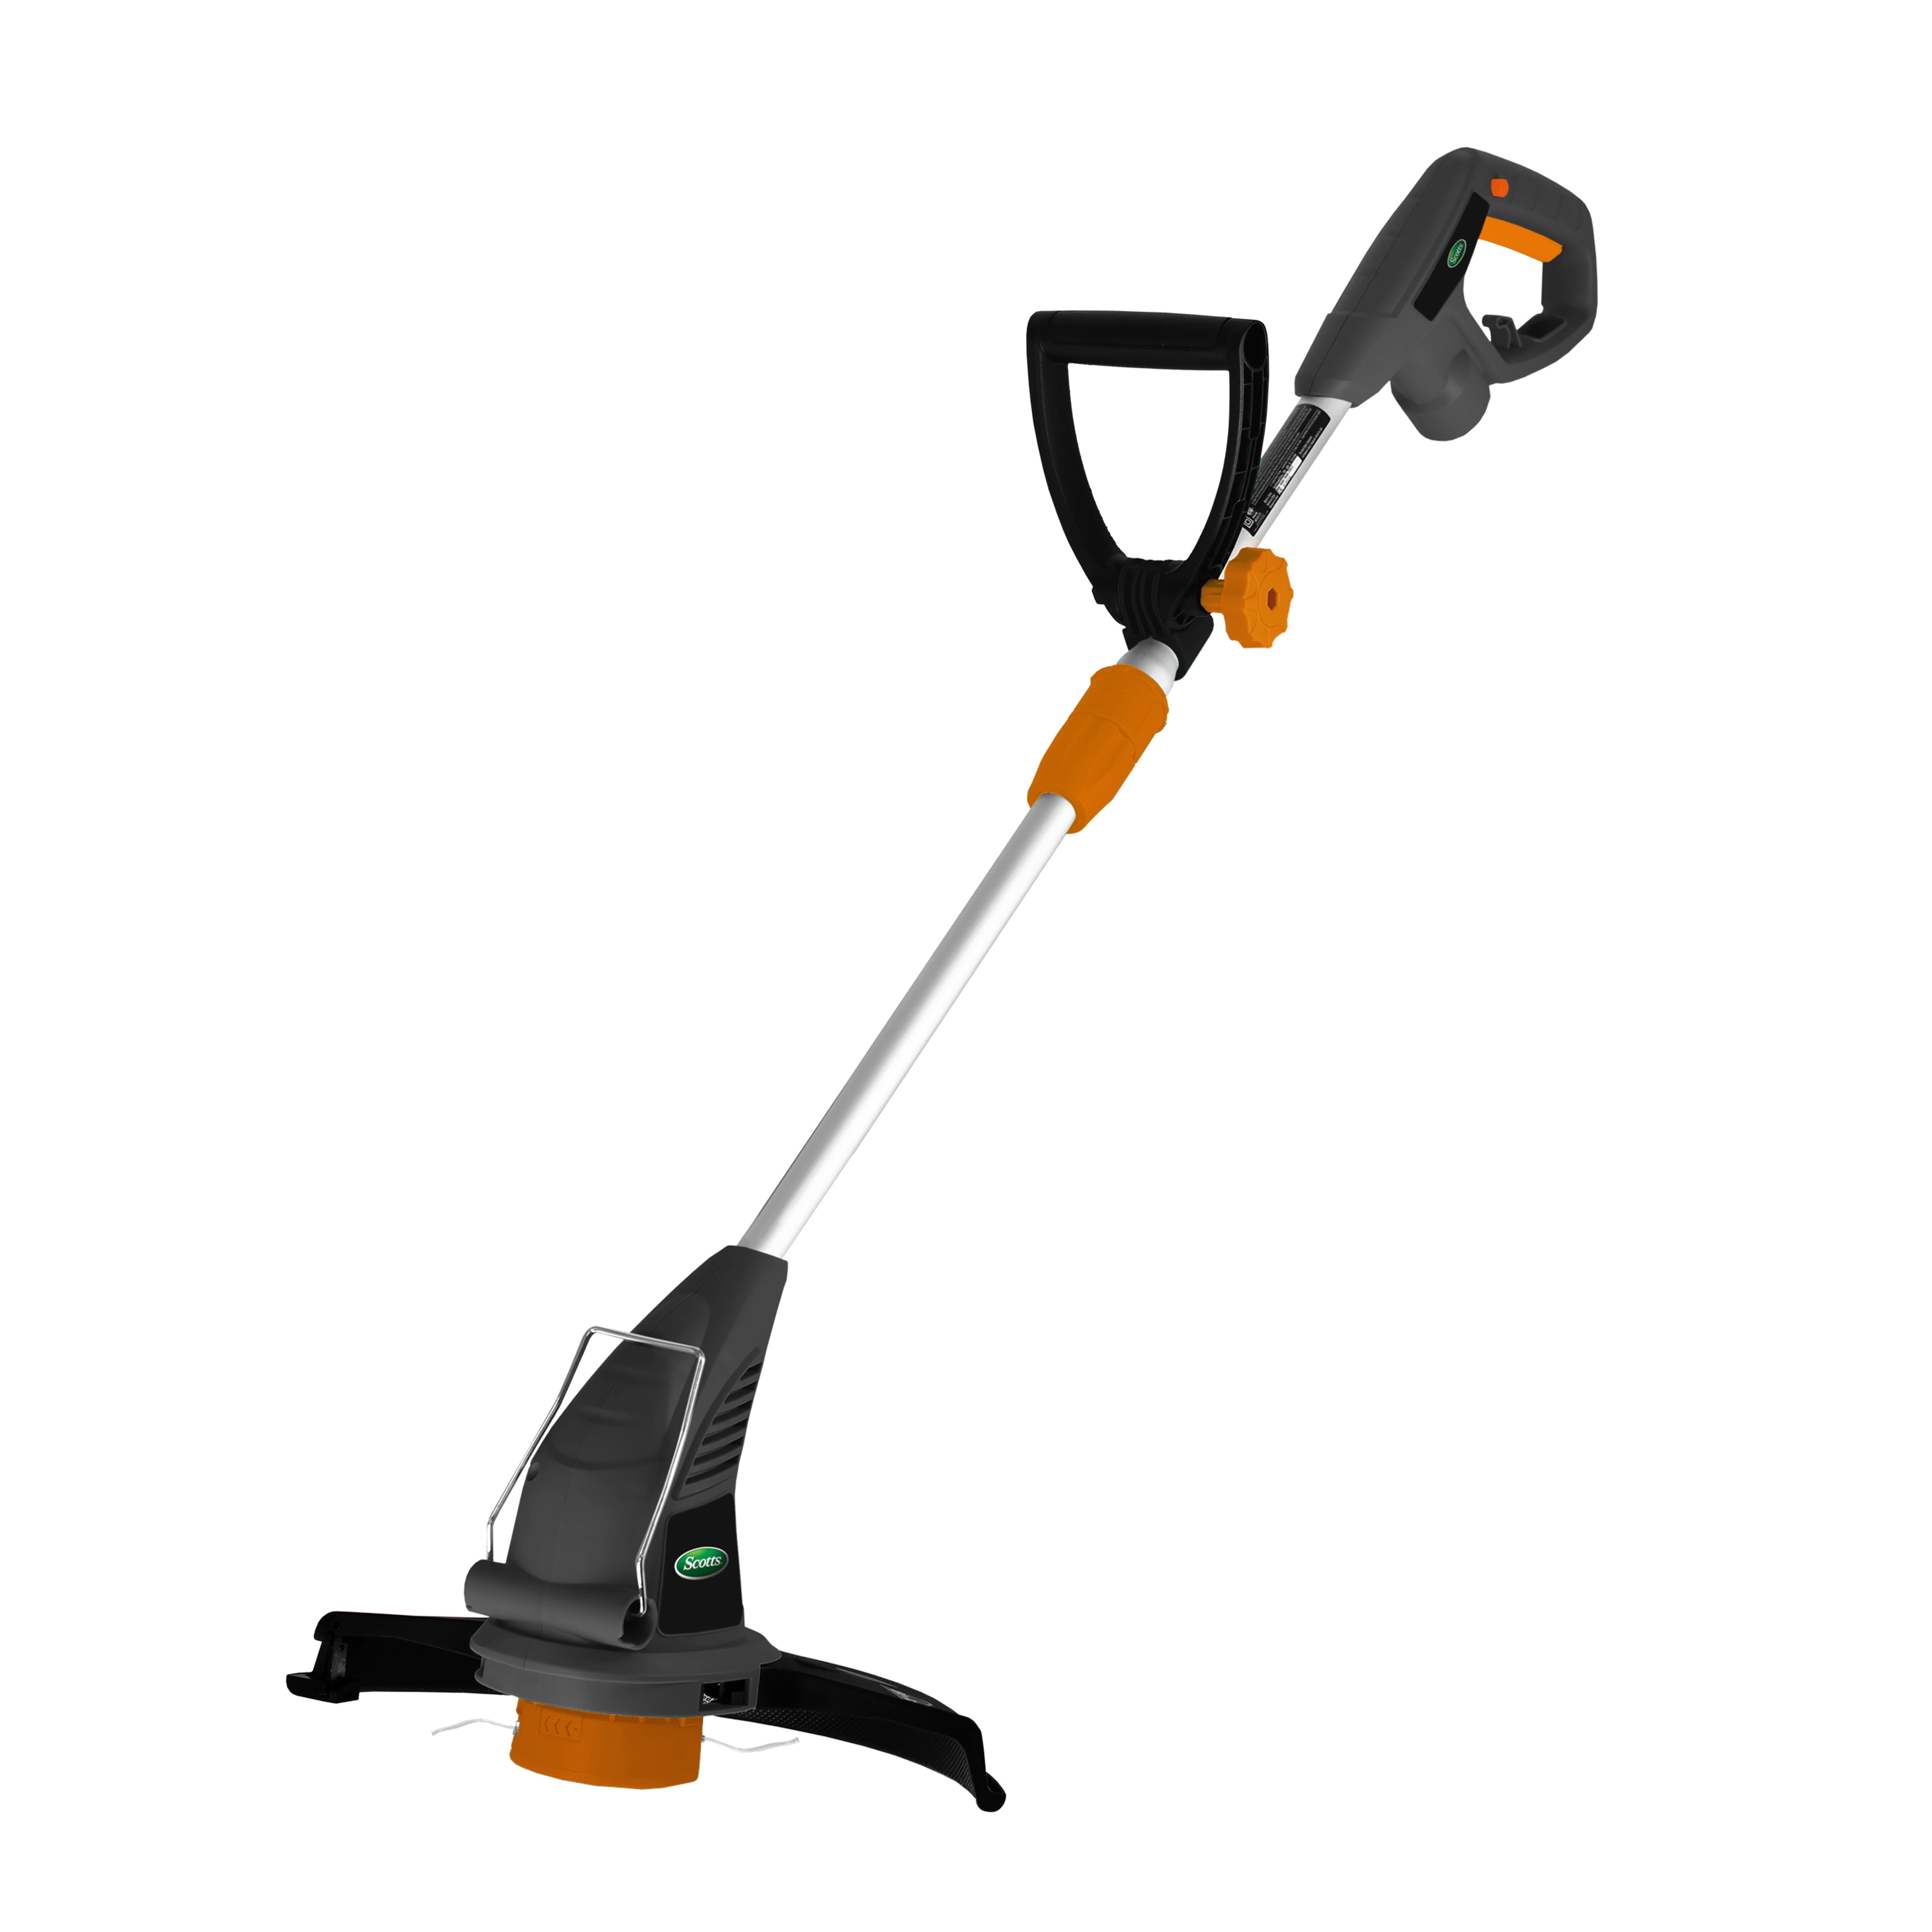 13in Black+Decker Corded Electric String Trimmer Weed Eater Wacker